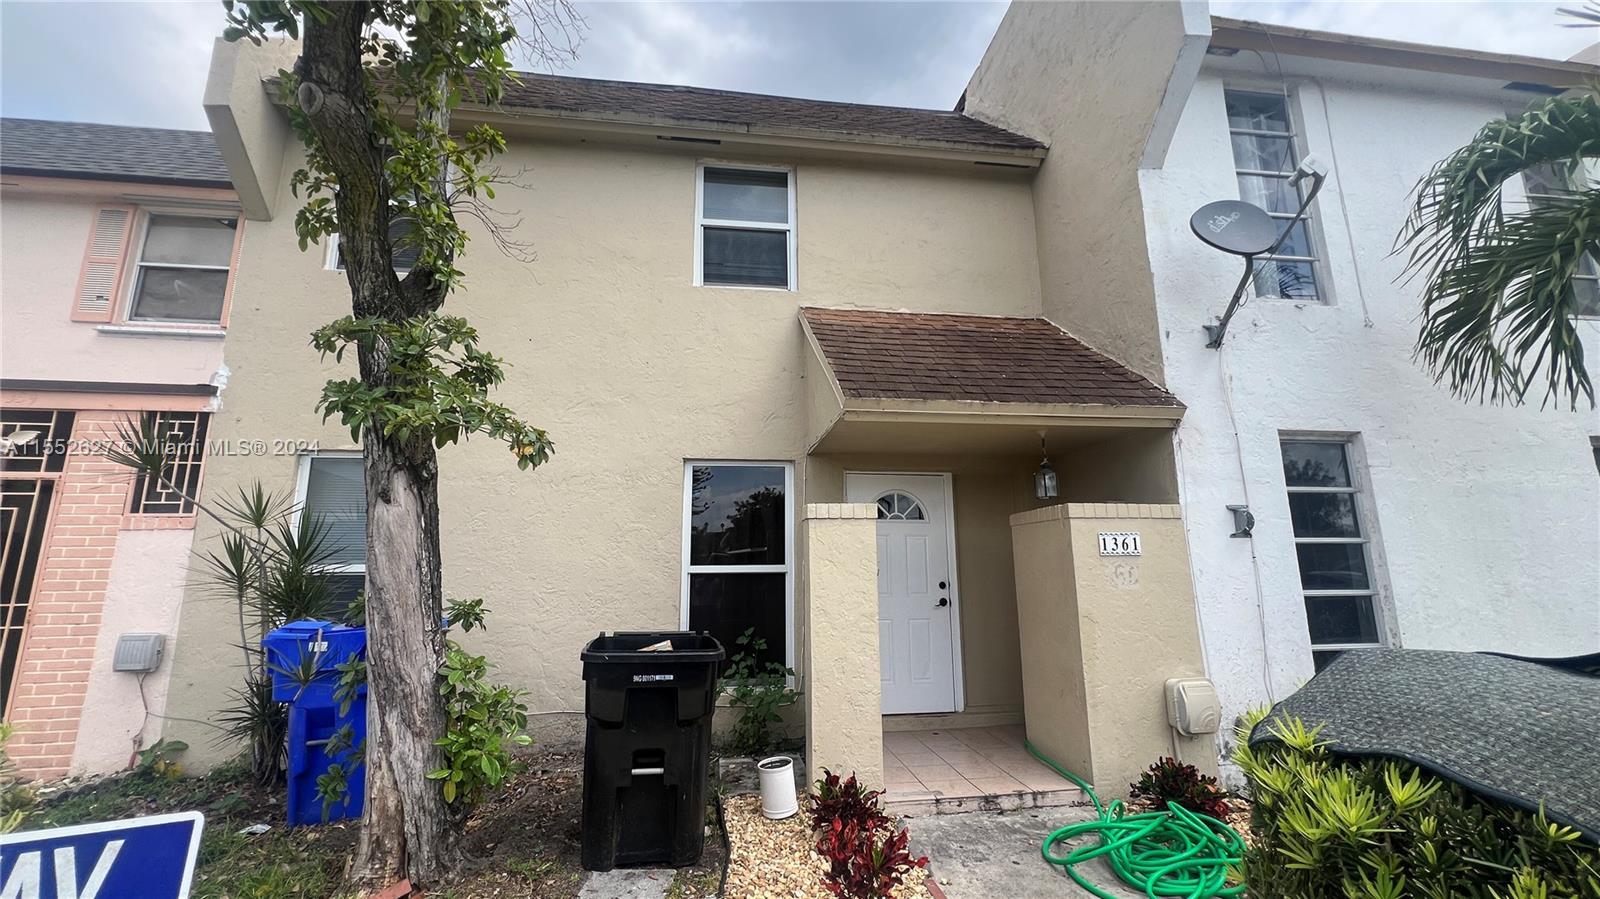 Photo of 1361 Seaview #1361 in North Lauderdale, FL